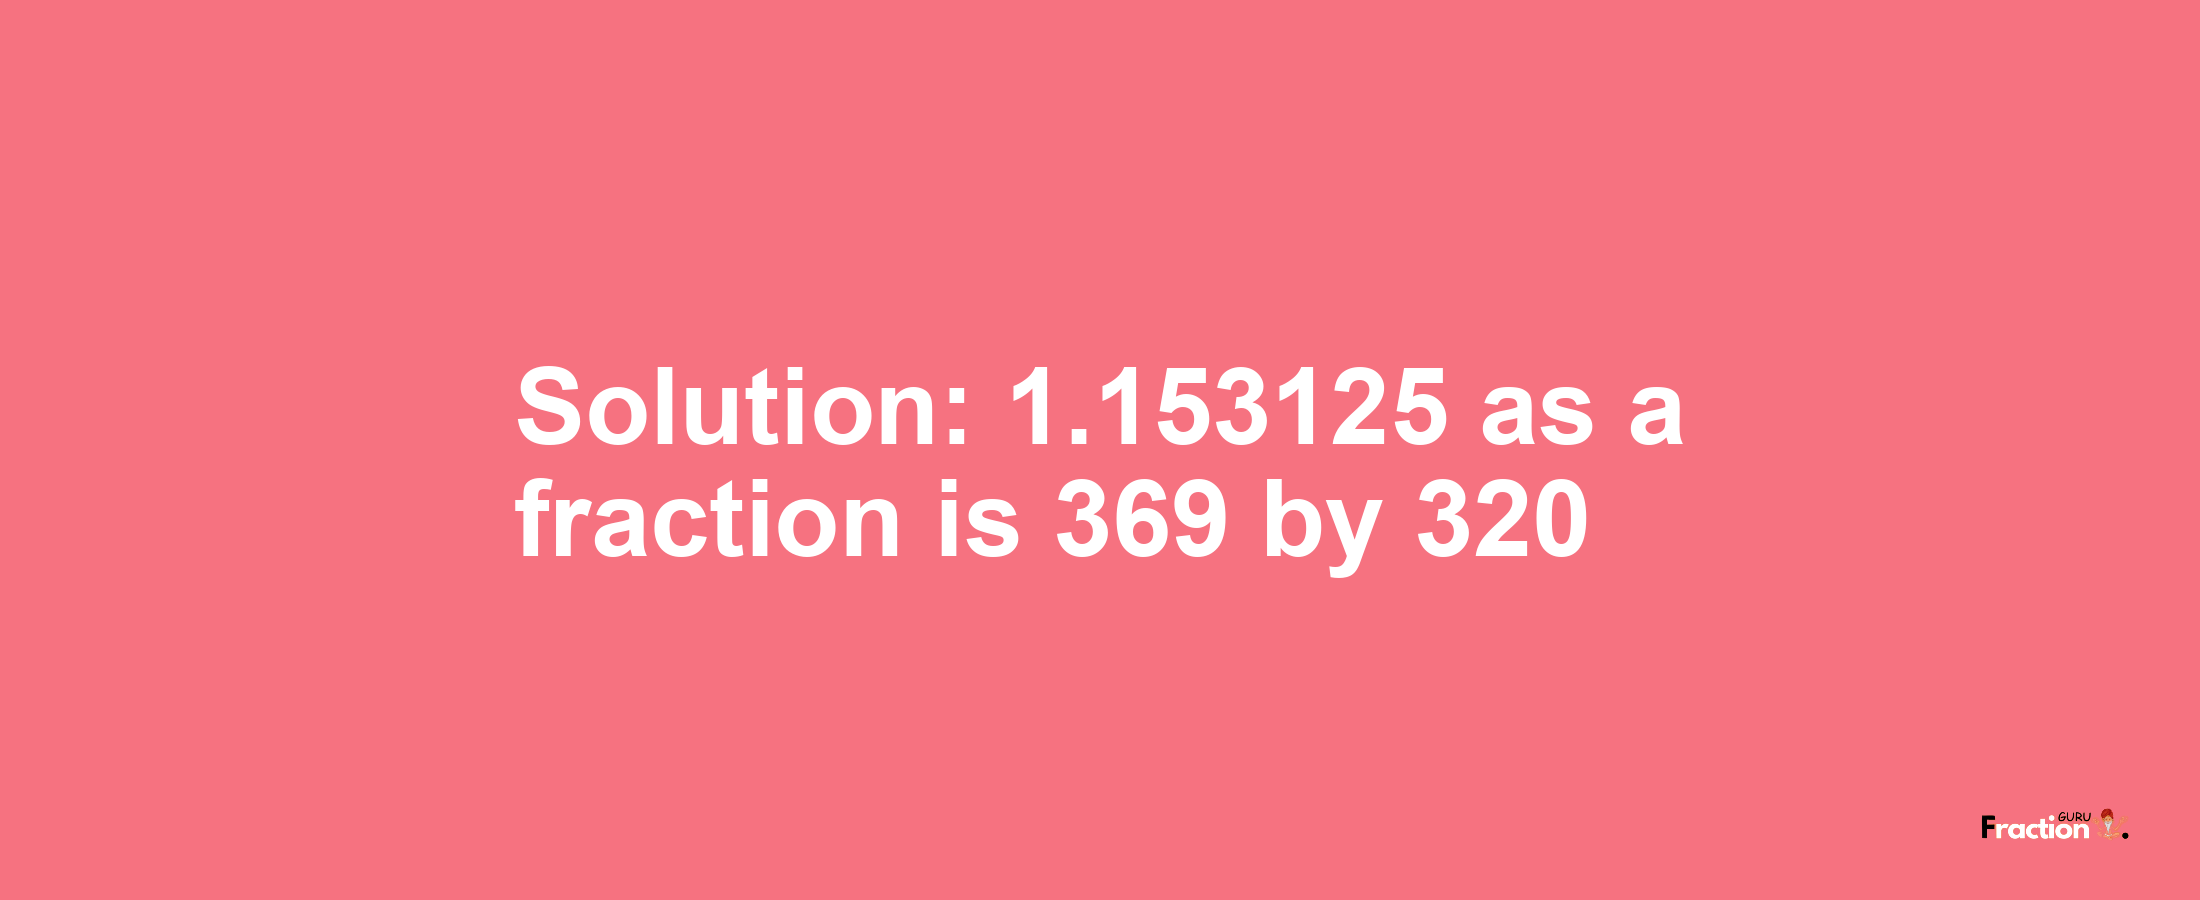 Solution:1.153125 as a fraction is 369/320